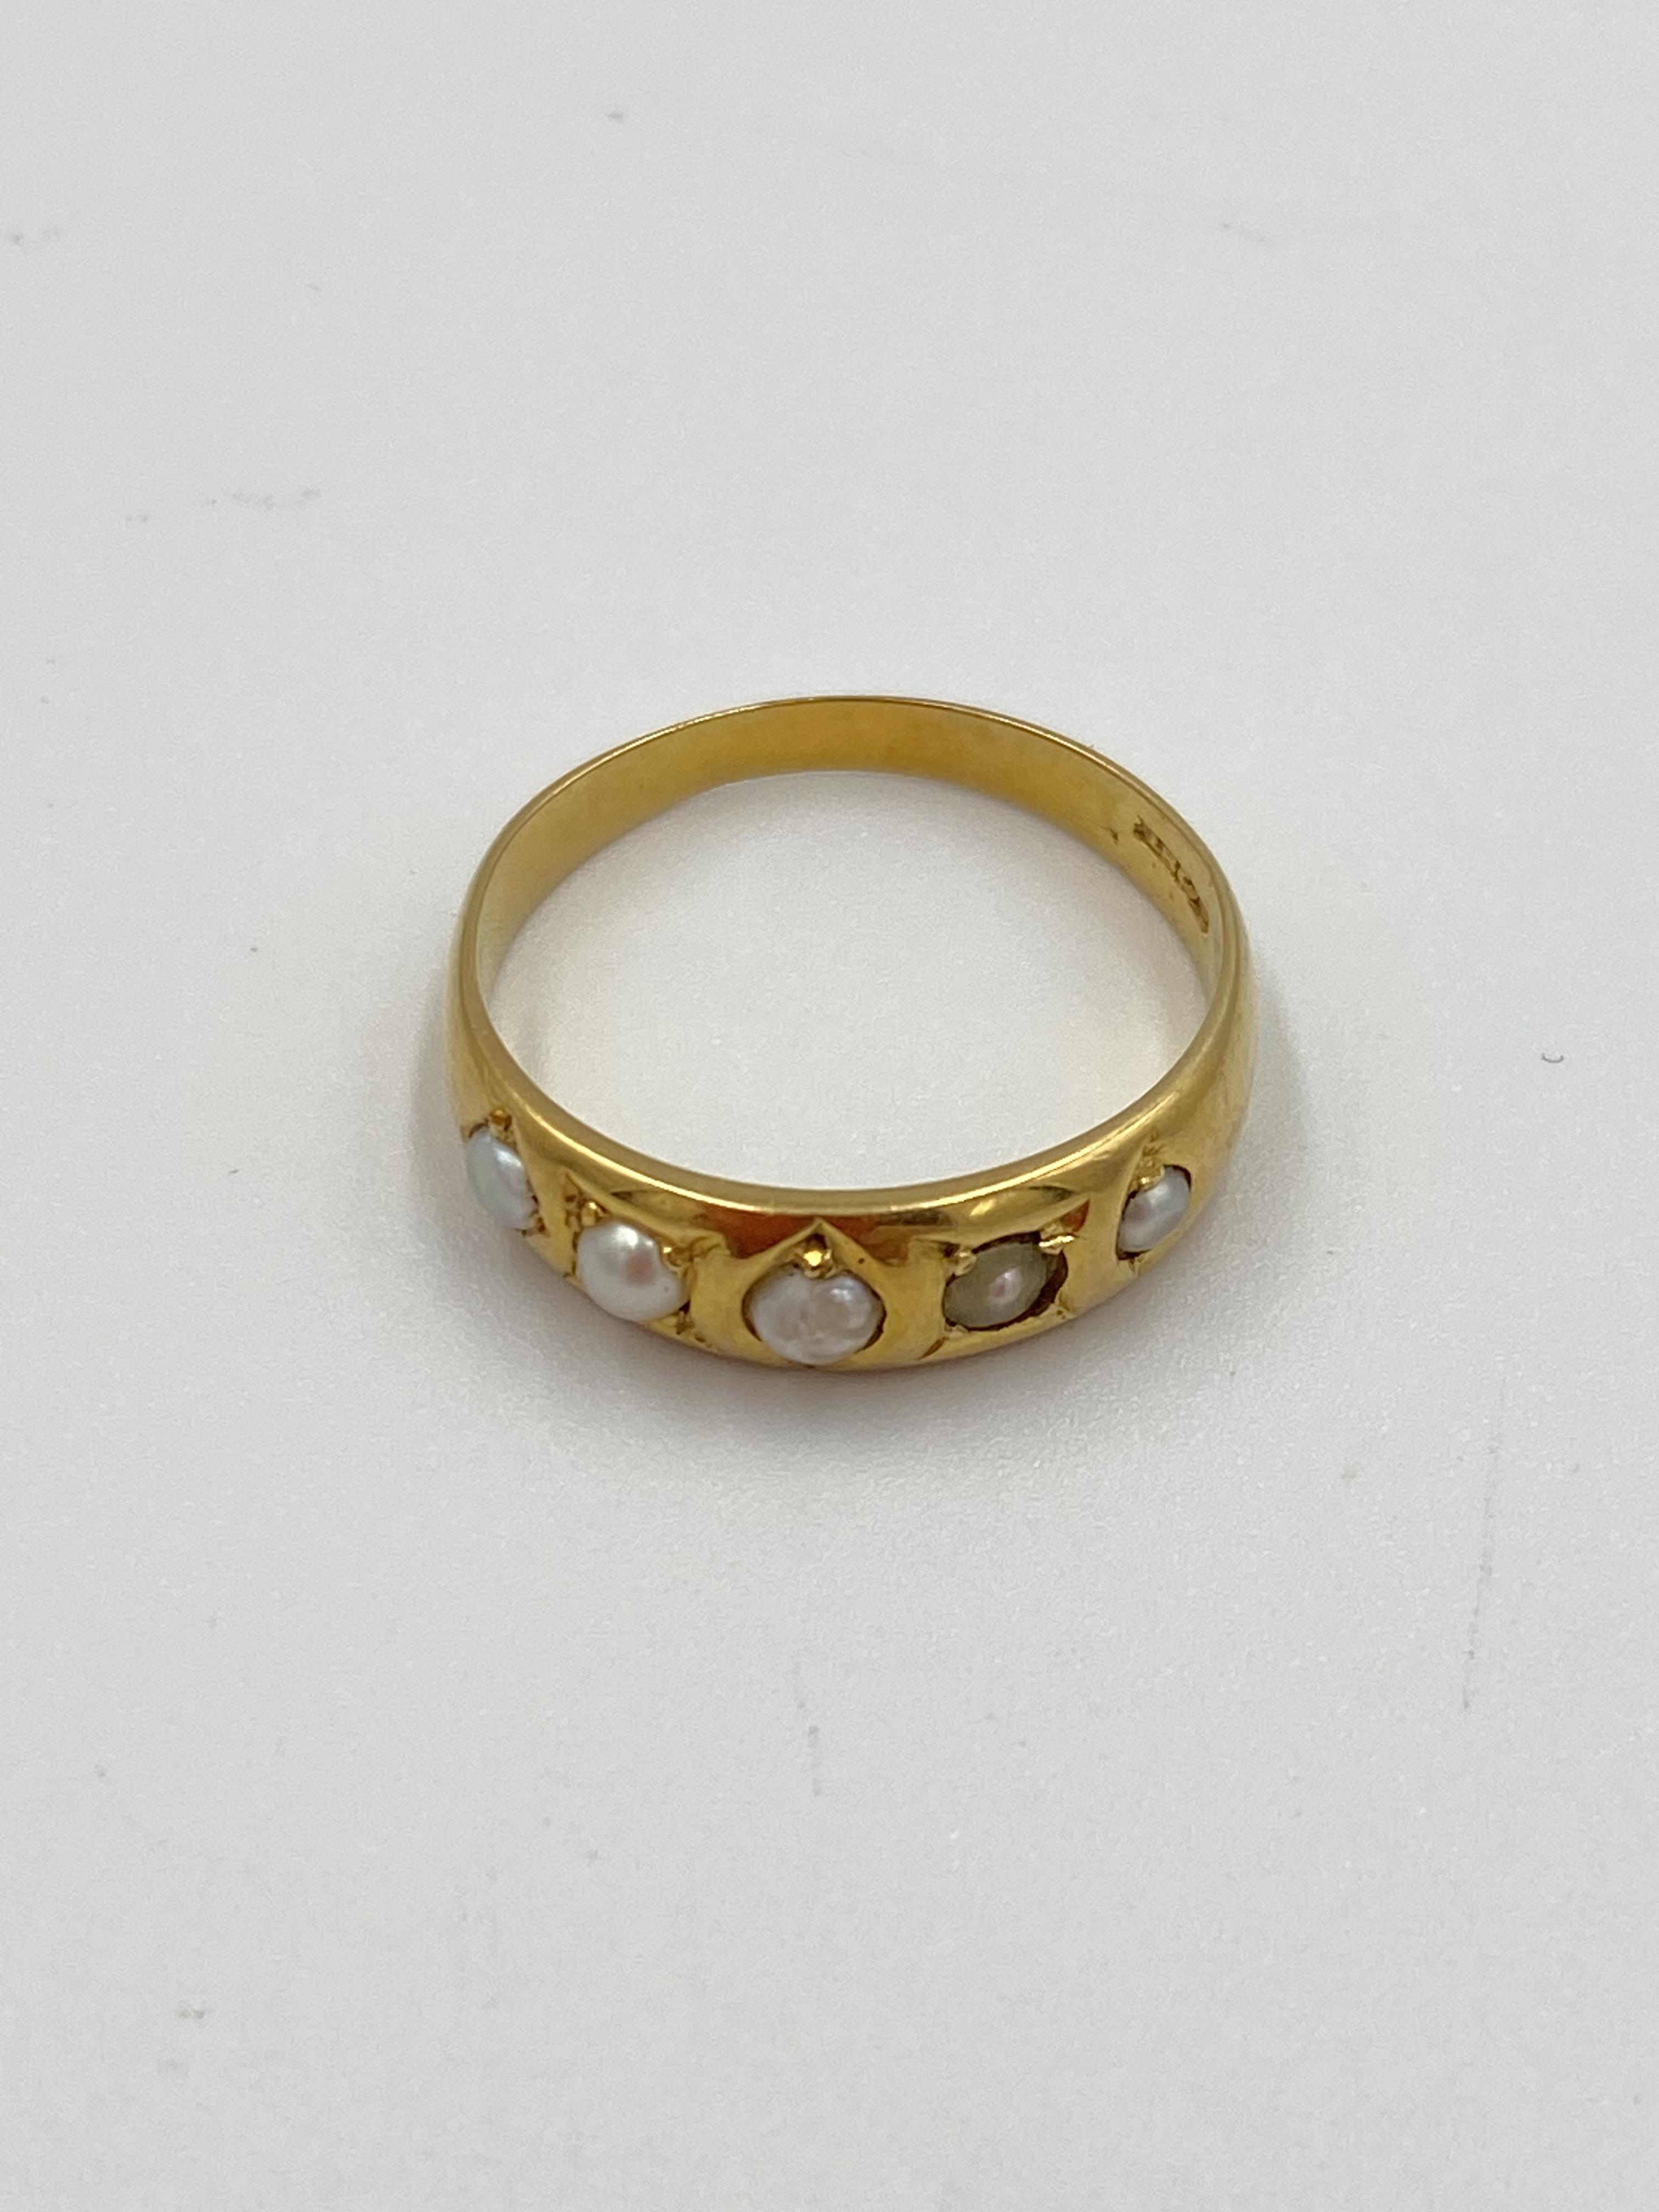 18ct gold and seed pearl ring - Image 2 of 4